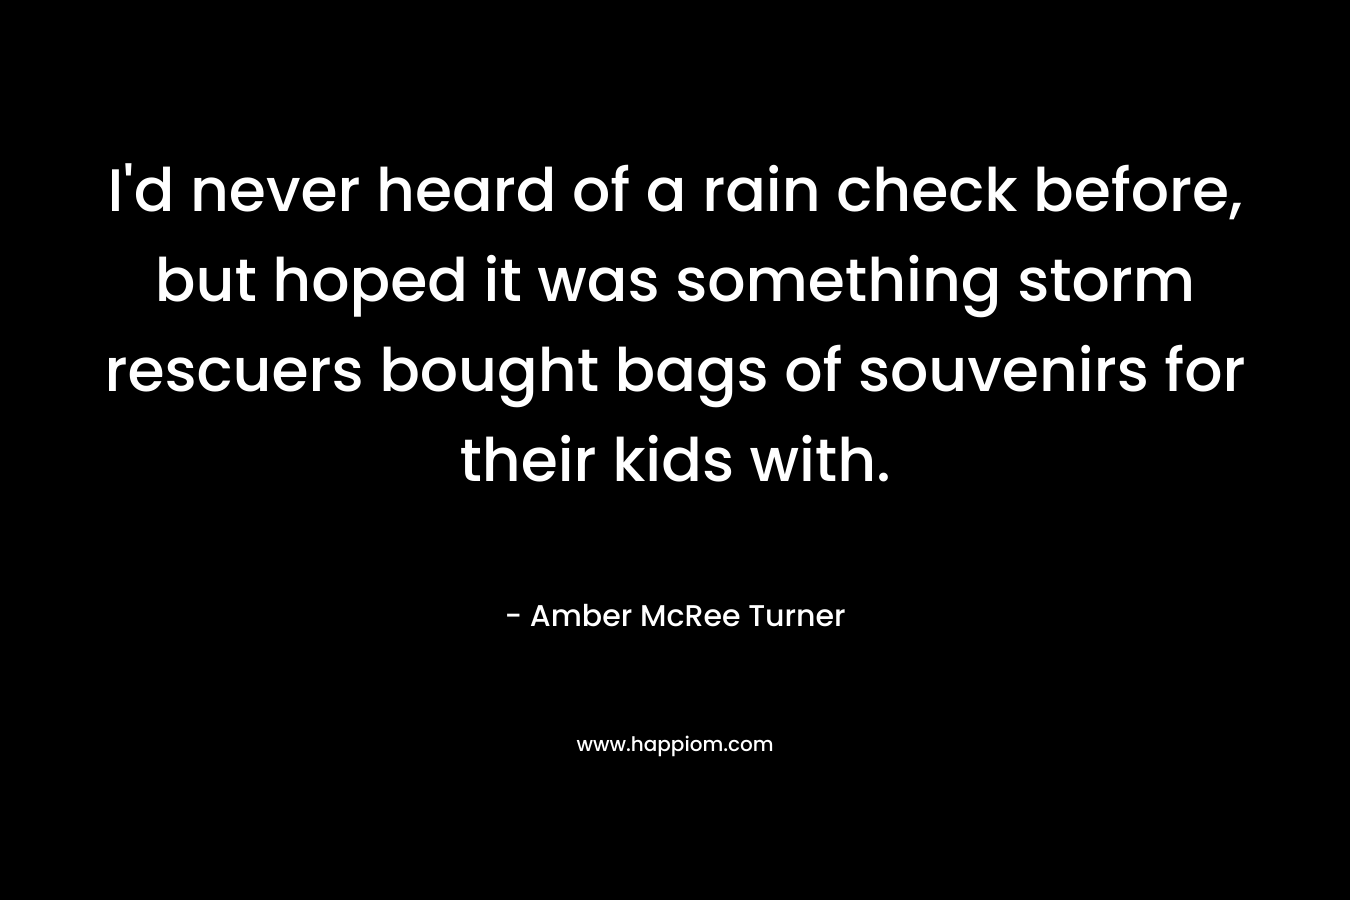 I’d never heard of a rain check before, but hoped it was something storm rescuers bought bags of souvenirs for their kids with. – Amber McRee Turner